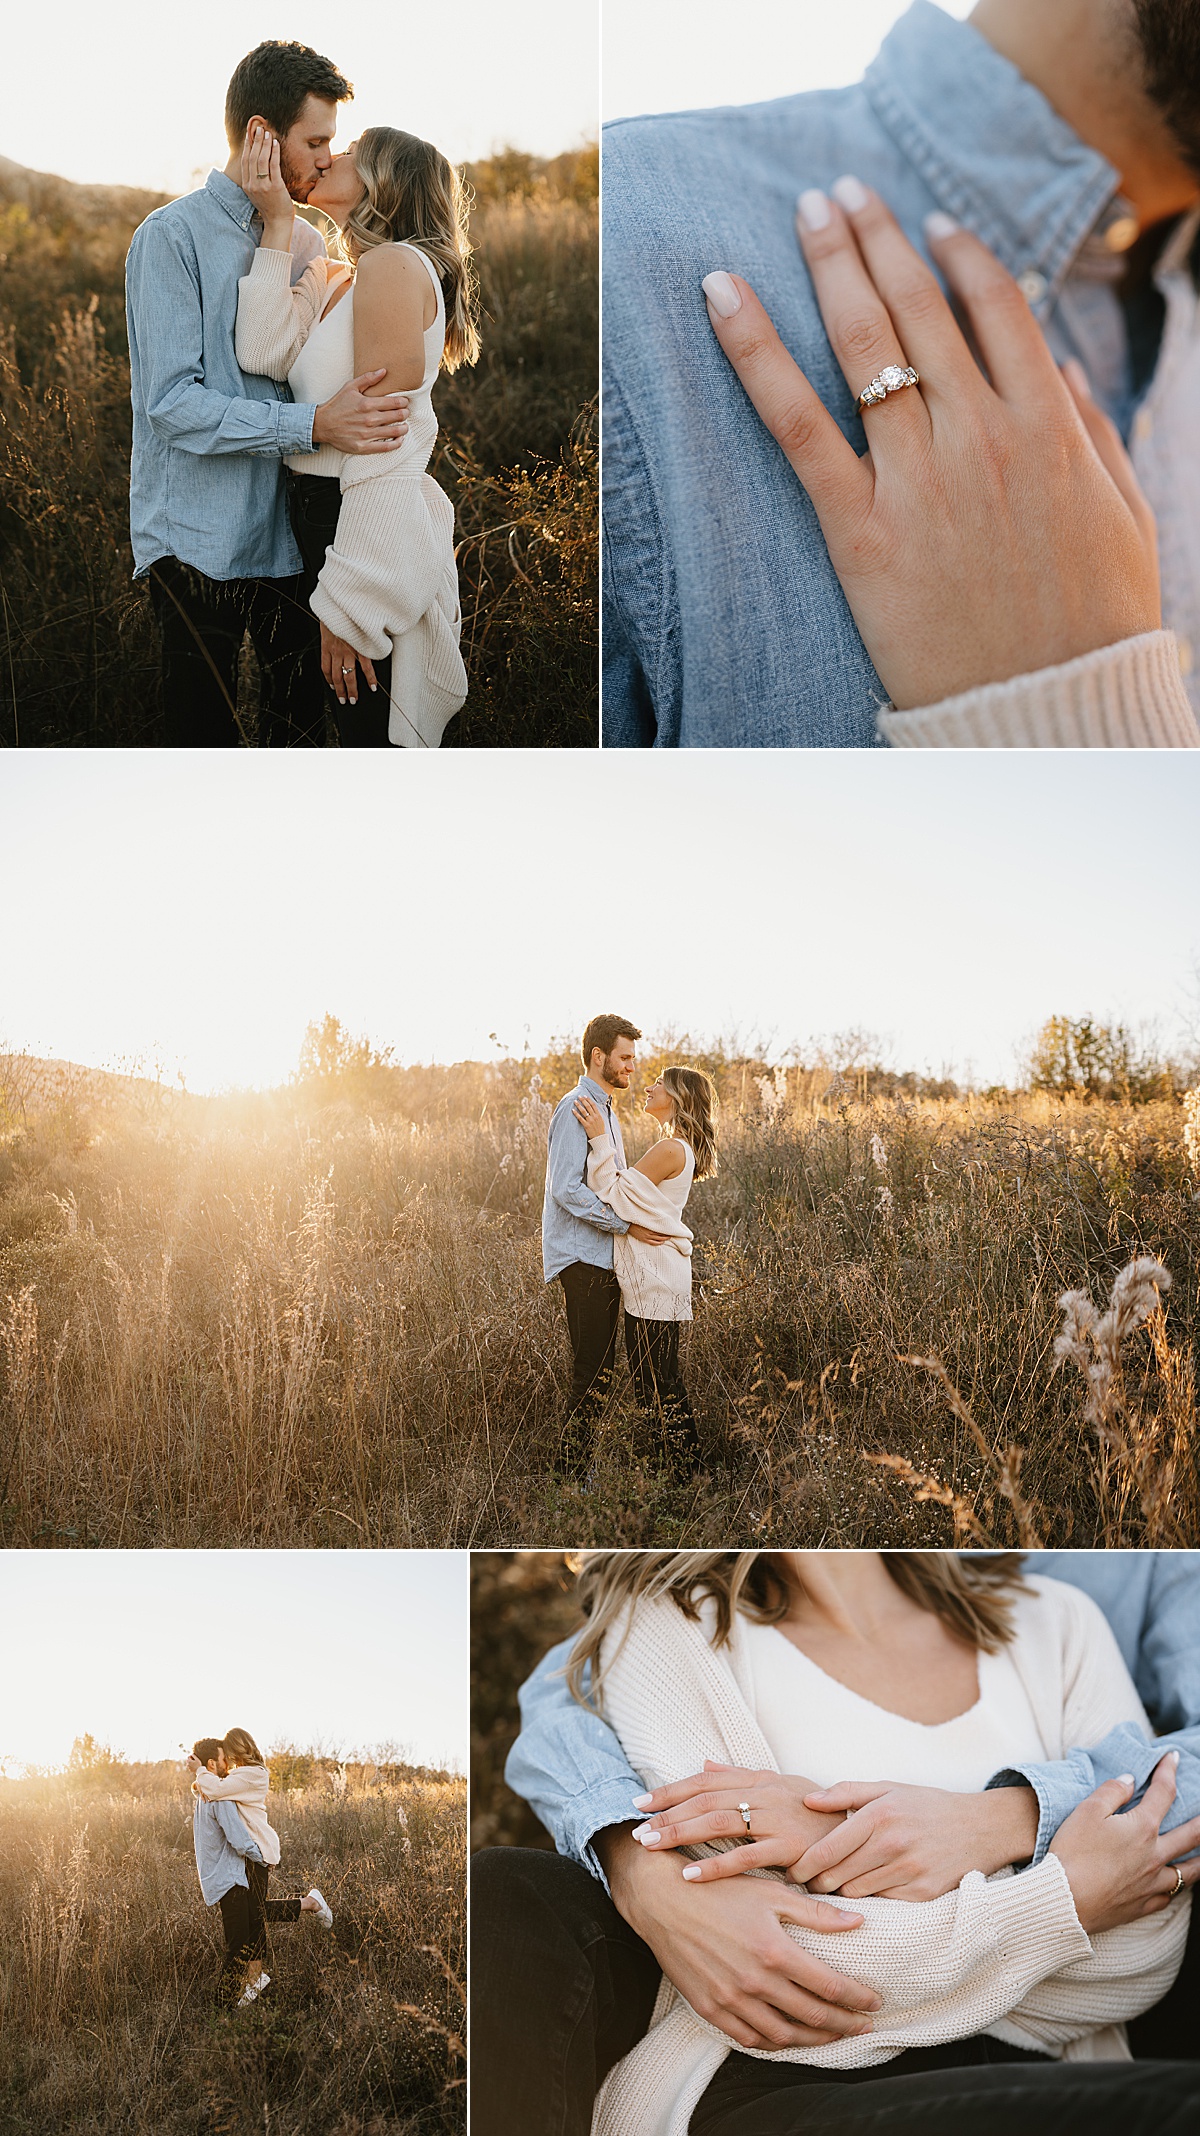 Engagement photo session in Tennessee at the Riverpark with tall grass and up close shots of the hand and engagement ring.